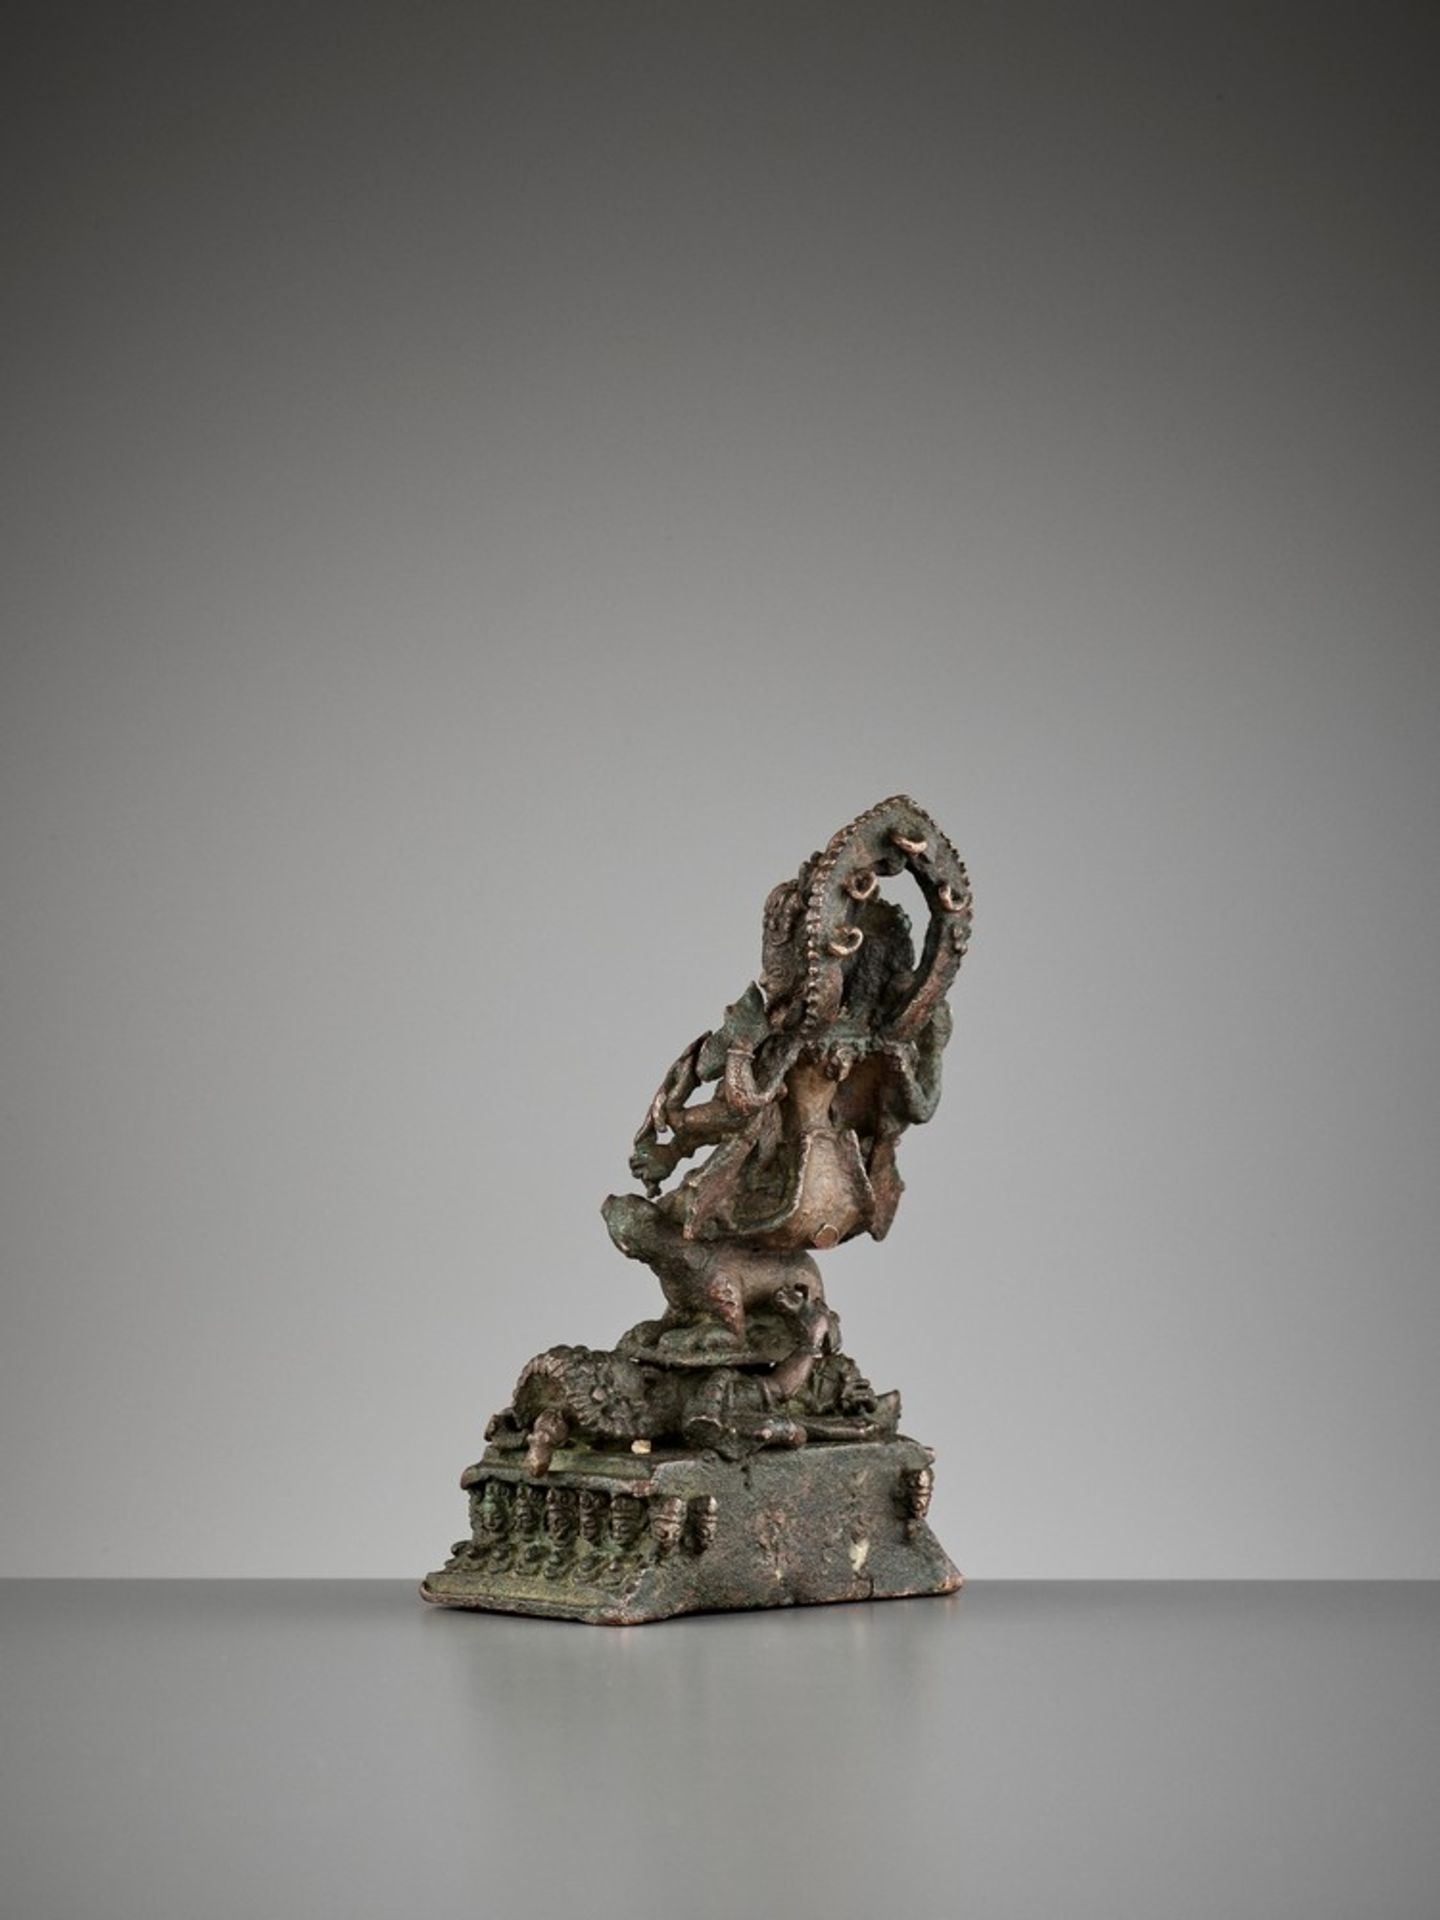 A BRONZE FIGURE OF JNANA DAKINI, LATE 16TH TO EARLY 17TH CENTURY - Image 5 of 9